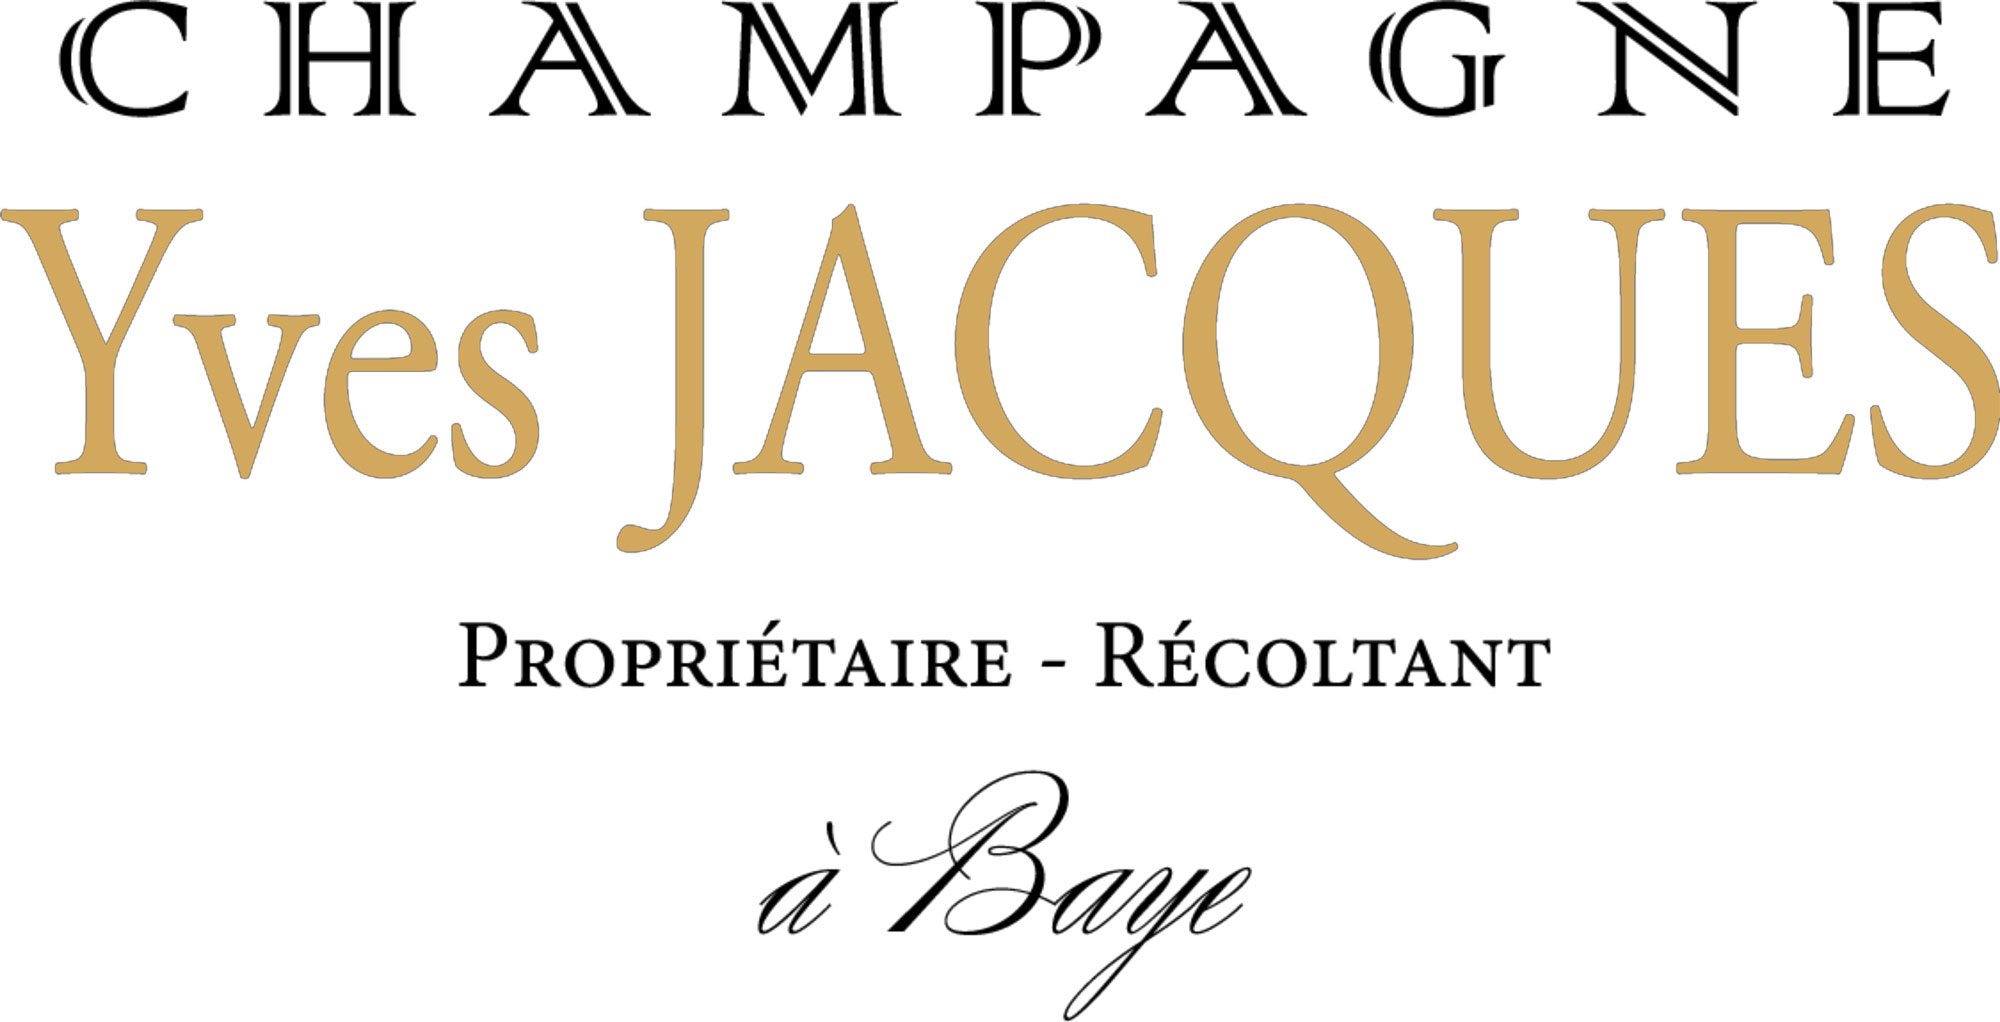 Champagne Yves Jacques